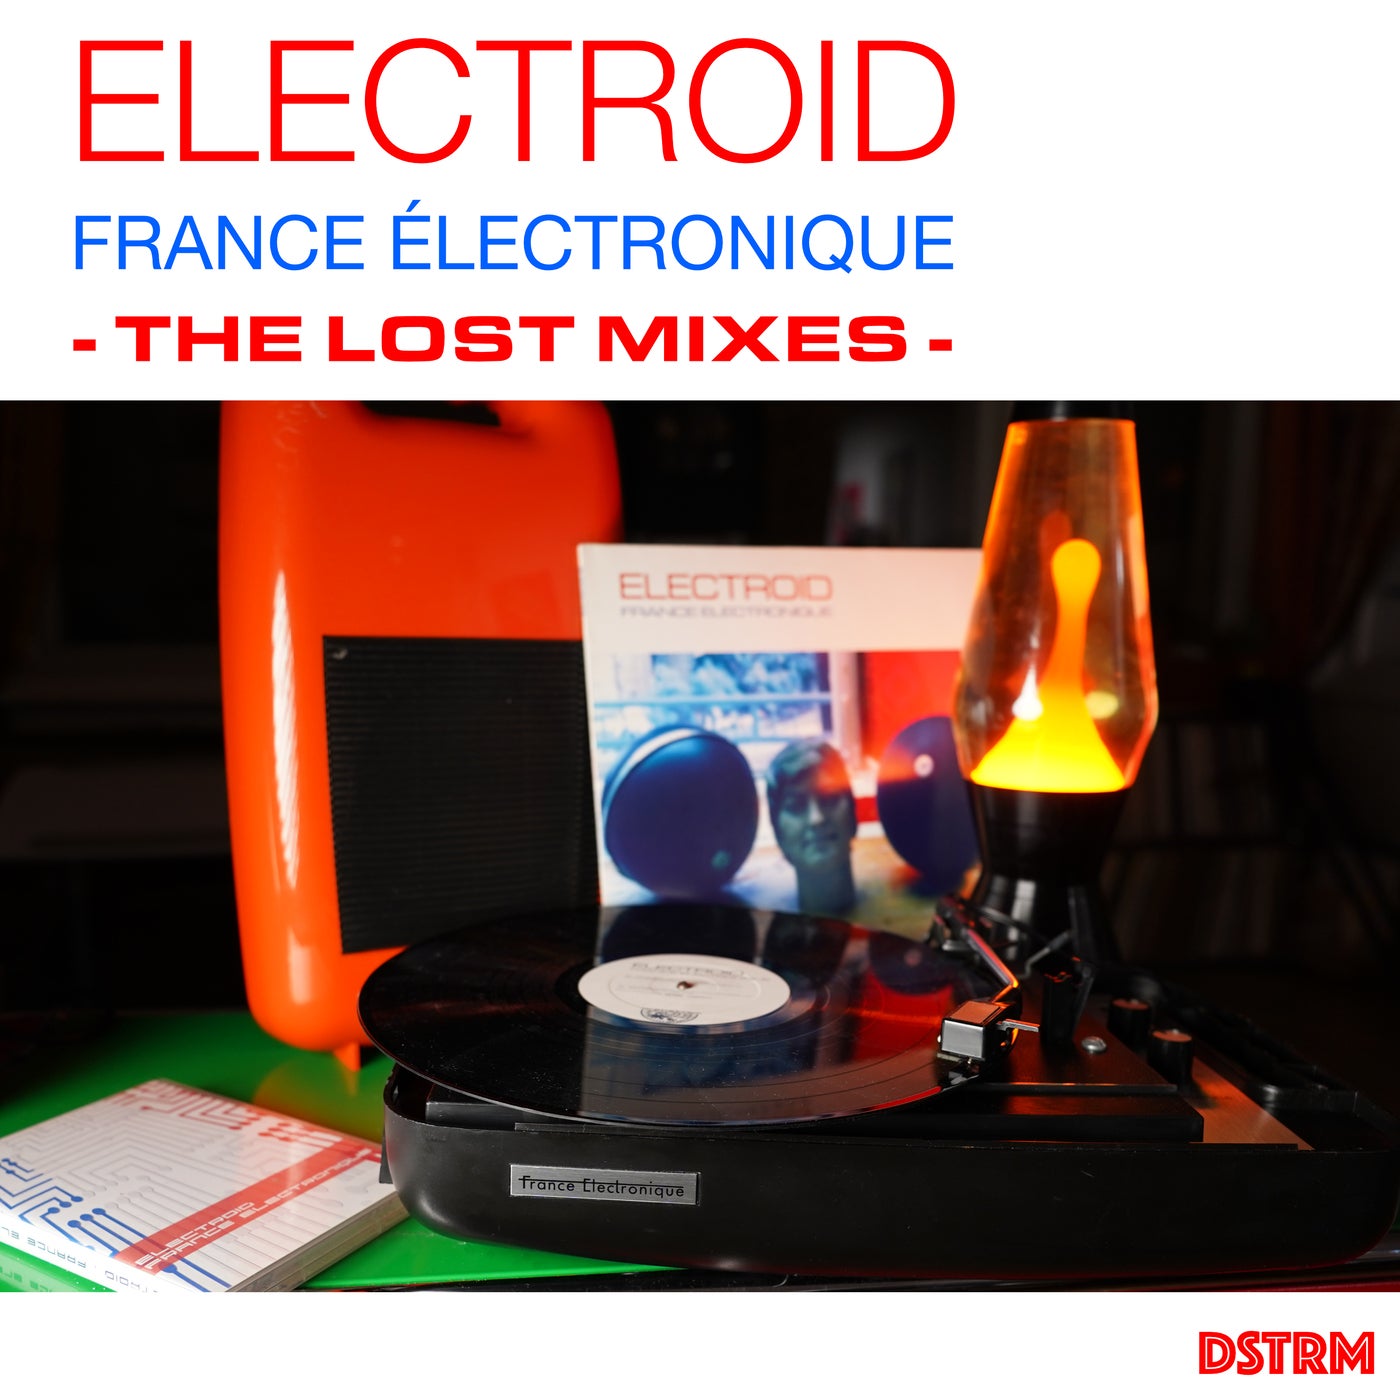 Electroid - France Electronique [Drehstrom] | Music & Downloads on 